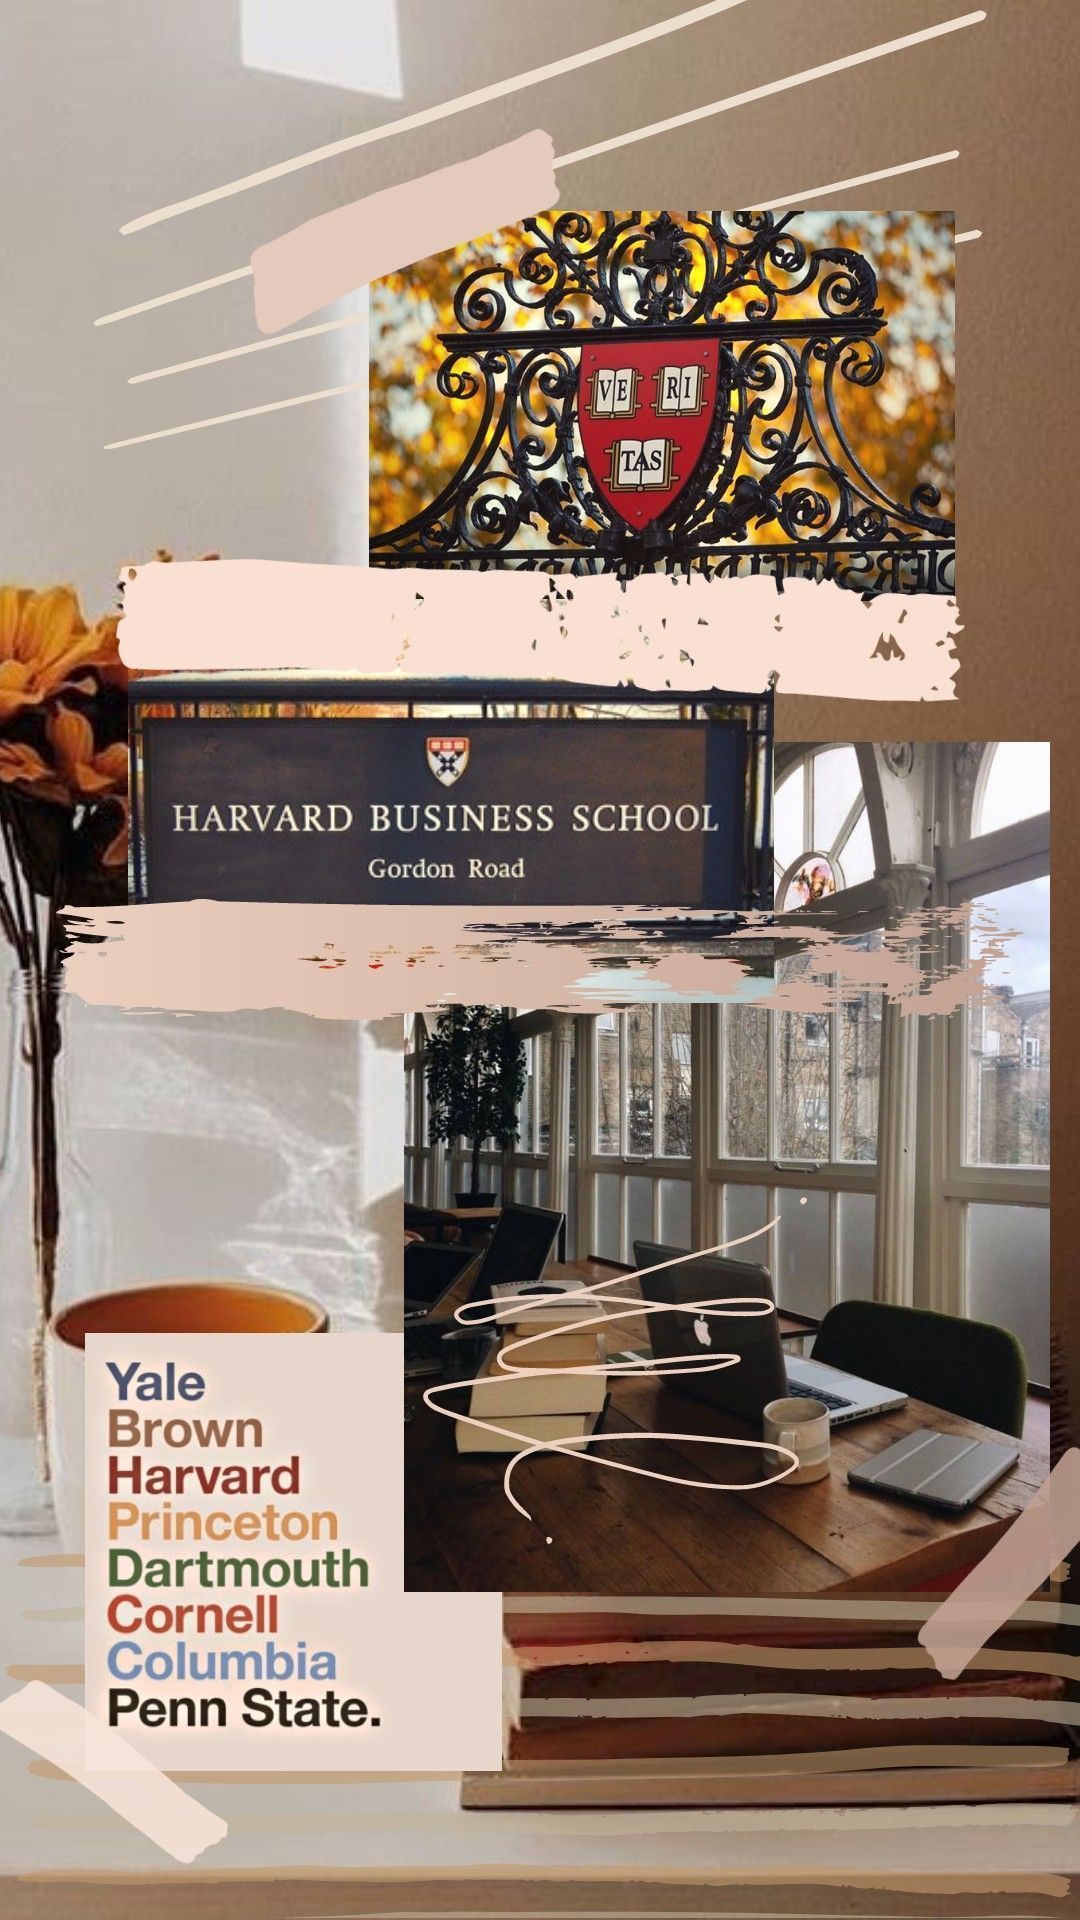 Collage of business school logos and a cup of coffee - Harvard